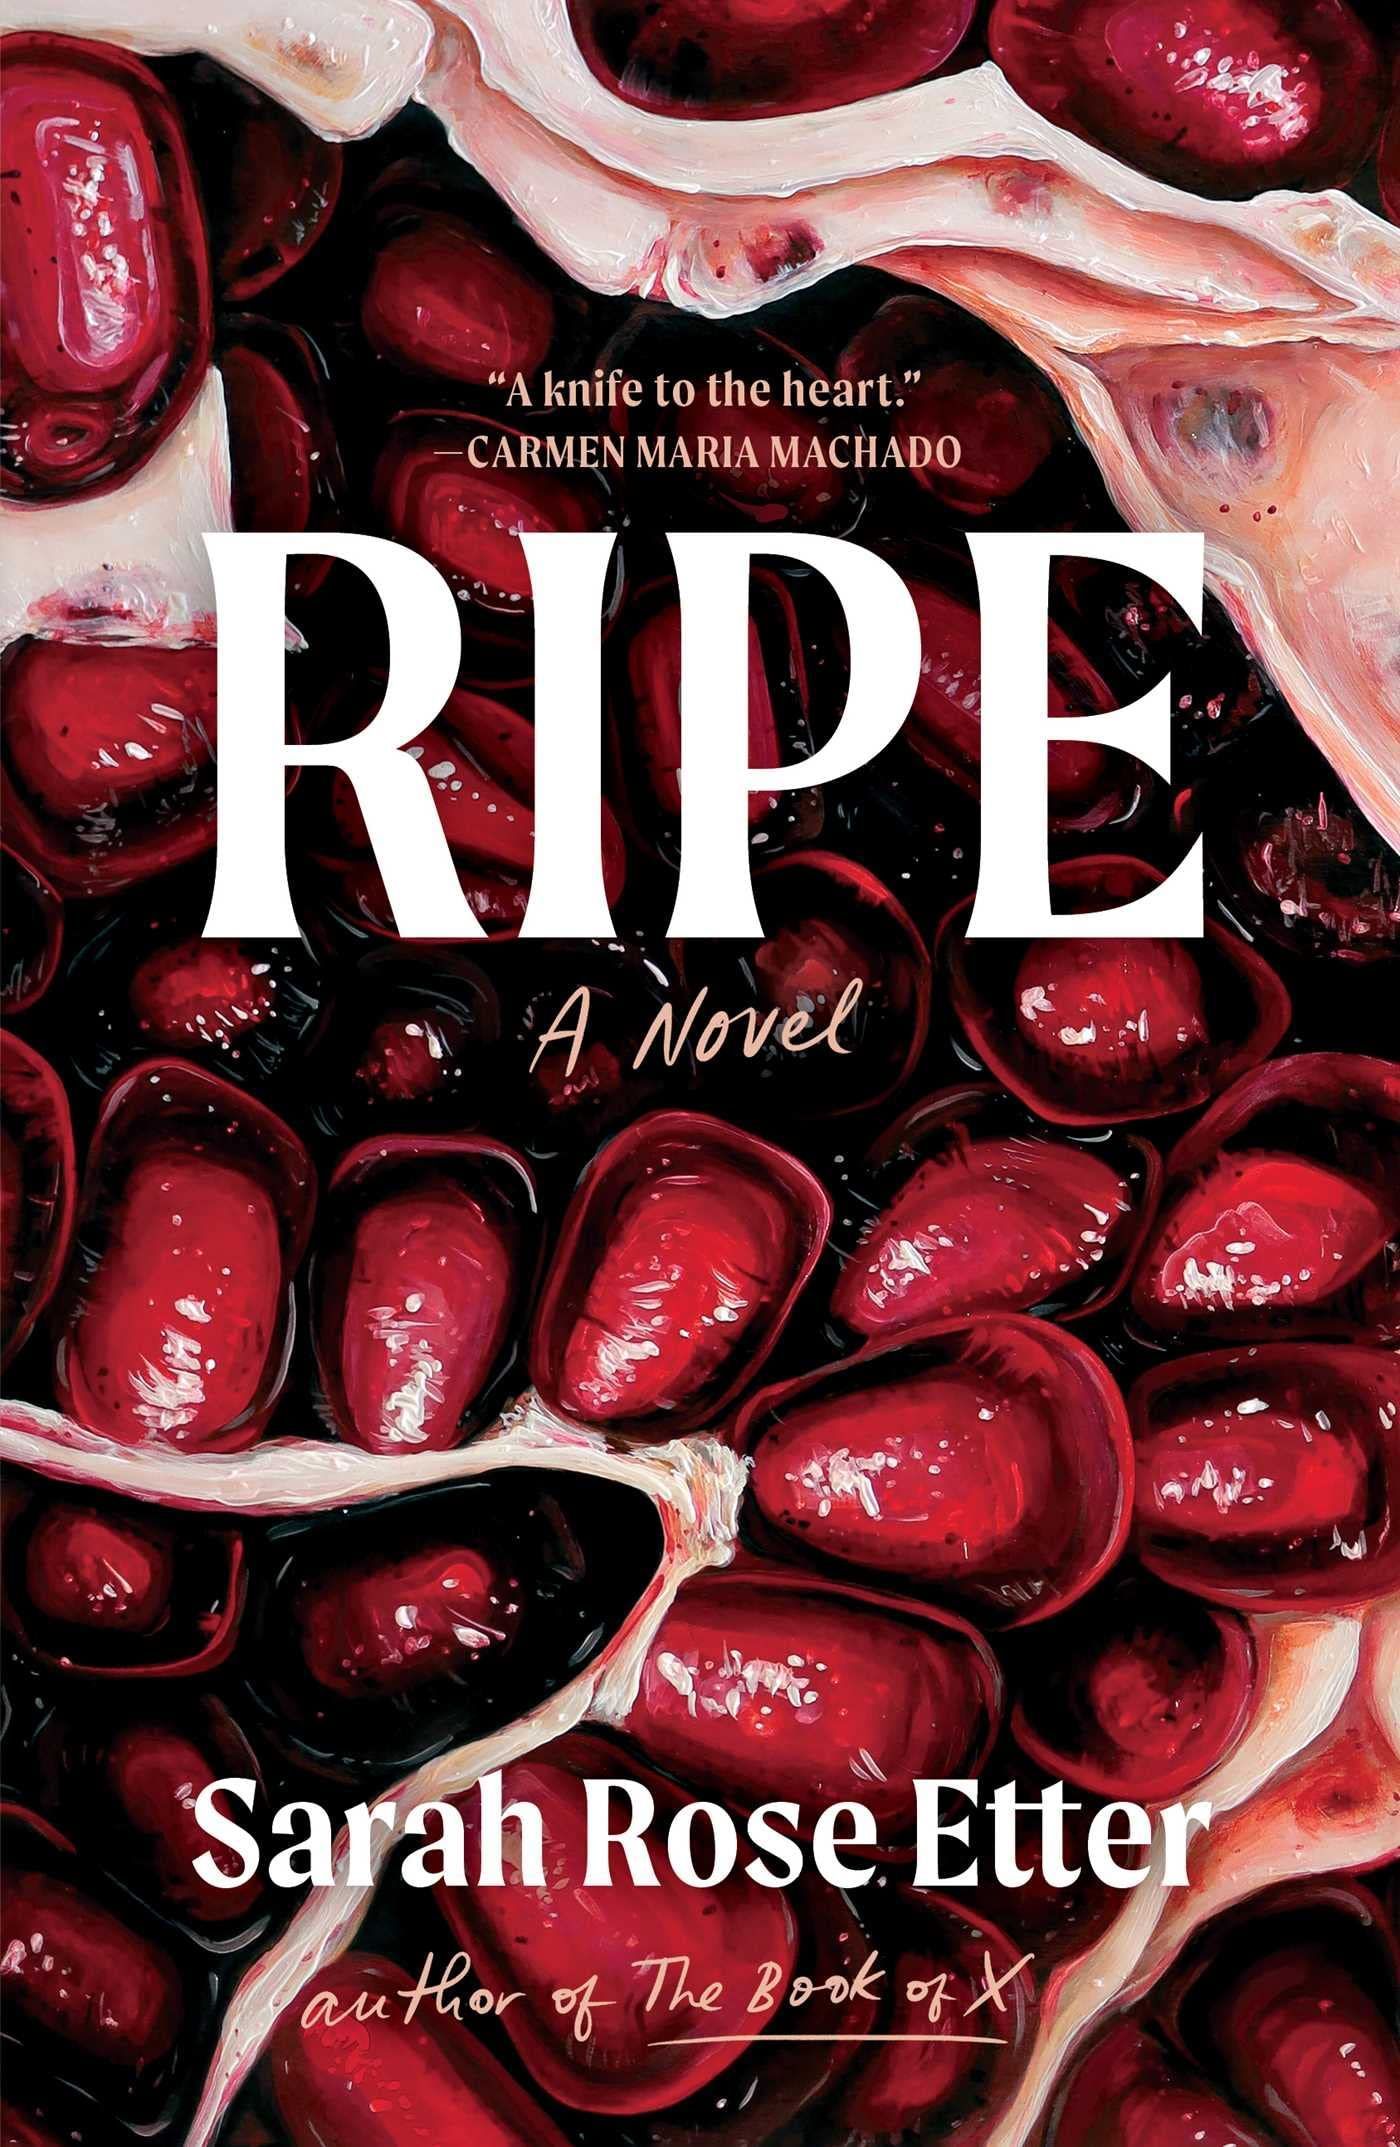 Ripening and Rotting in the Uncanny Valley: On Sarah Rose Etter’s “Ripe”